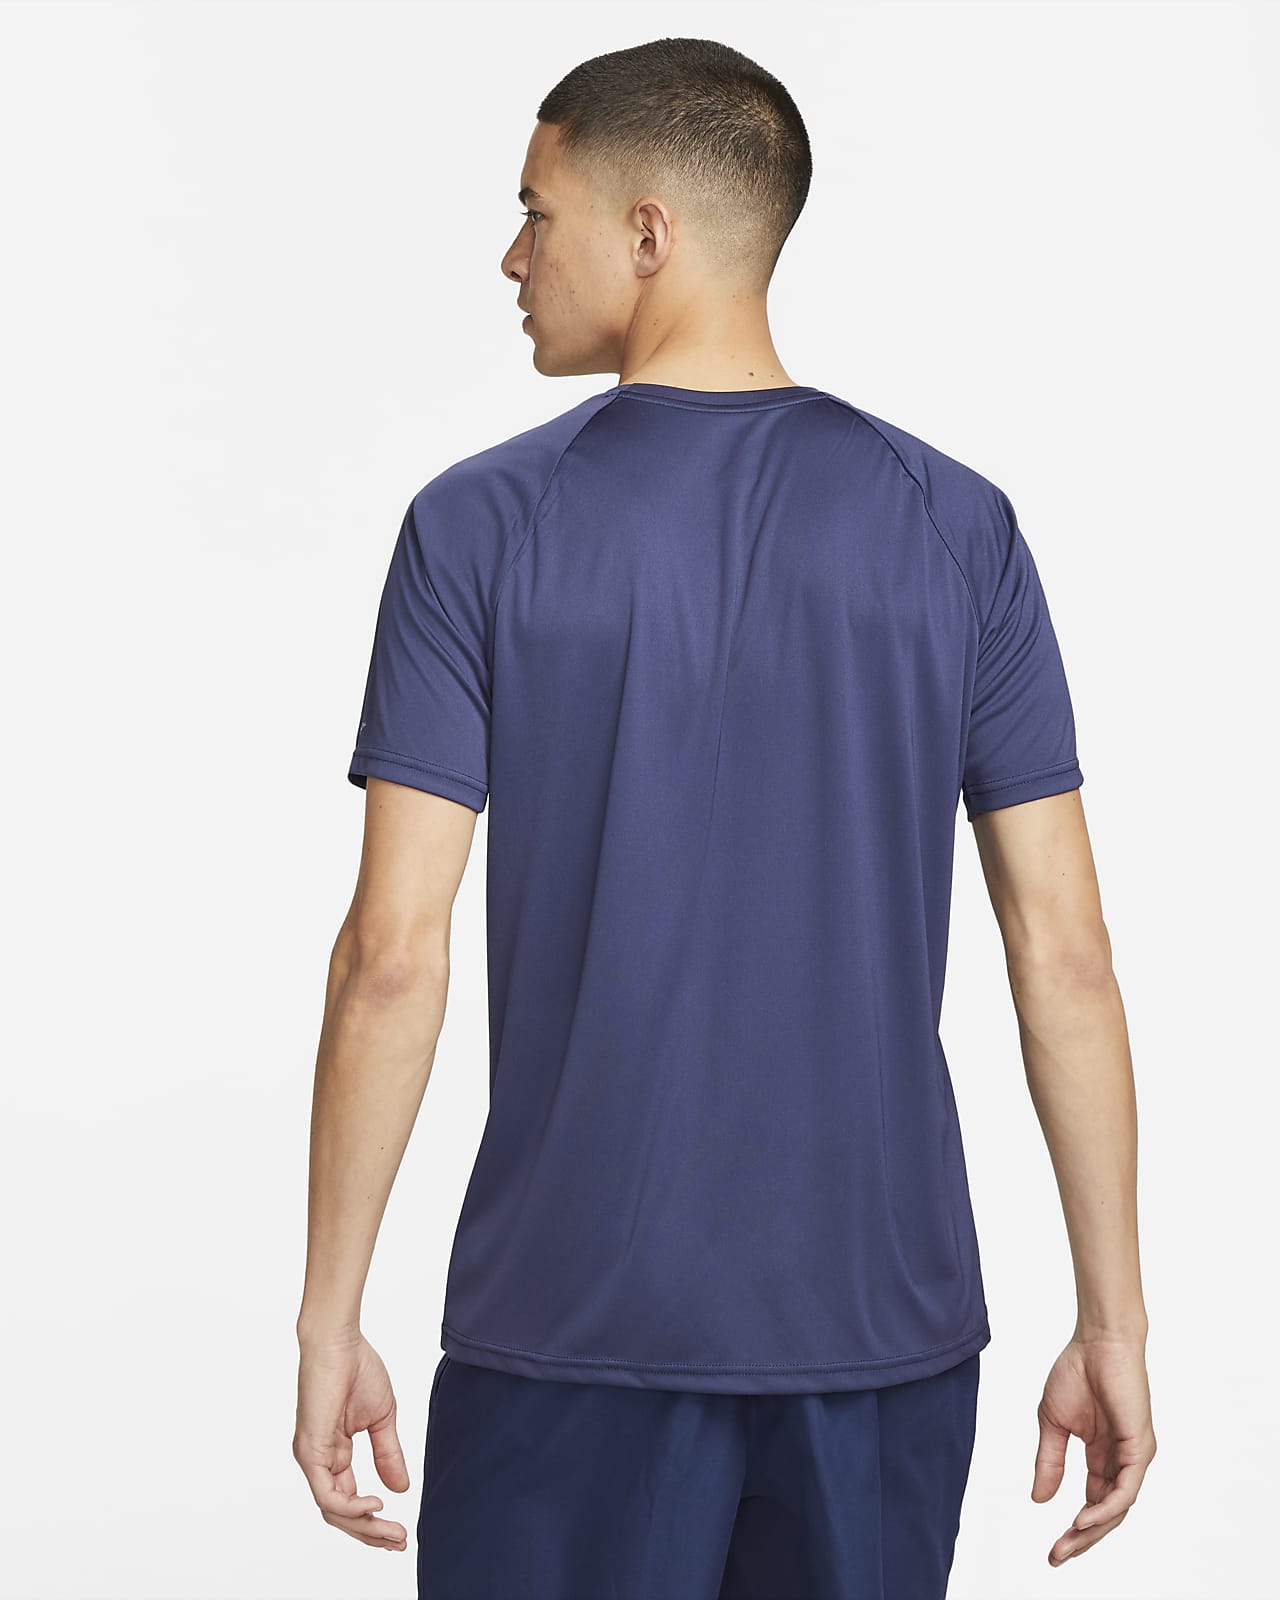 G Gradual Workout Shirts For Men Short Sleeve Quick Dry Athletic